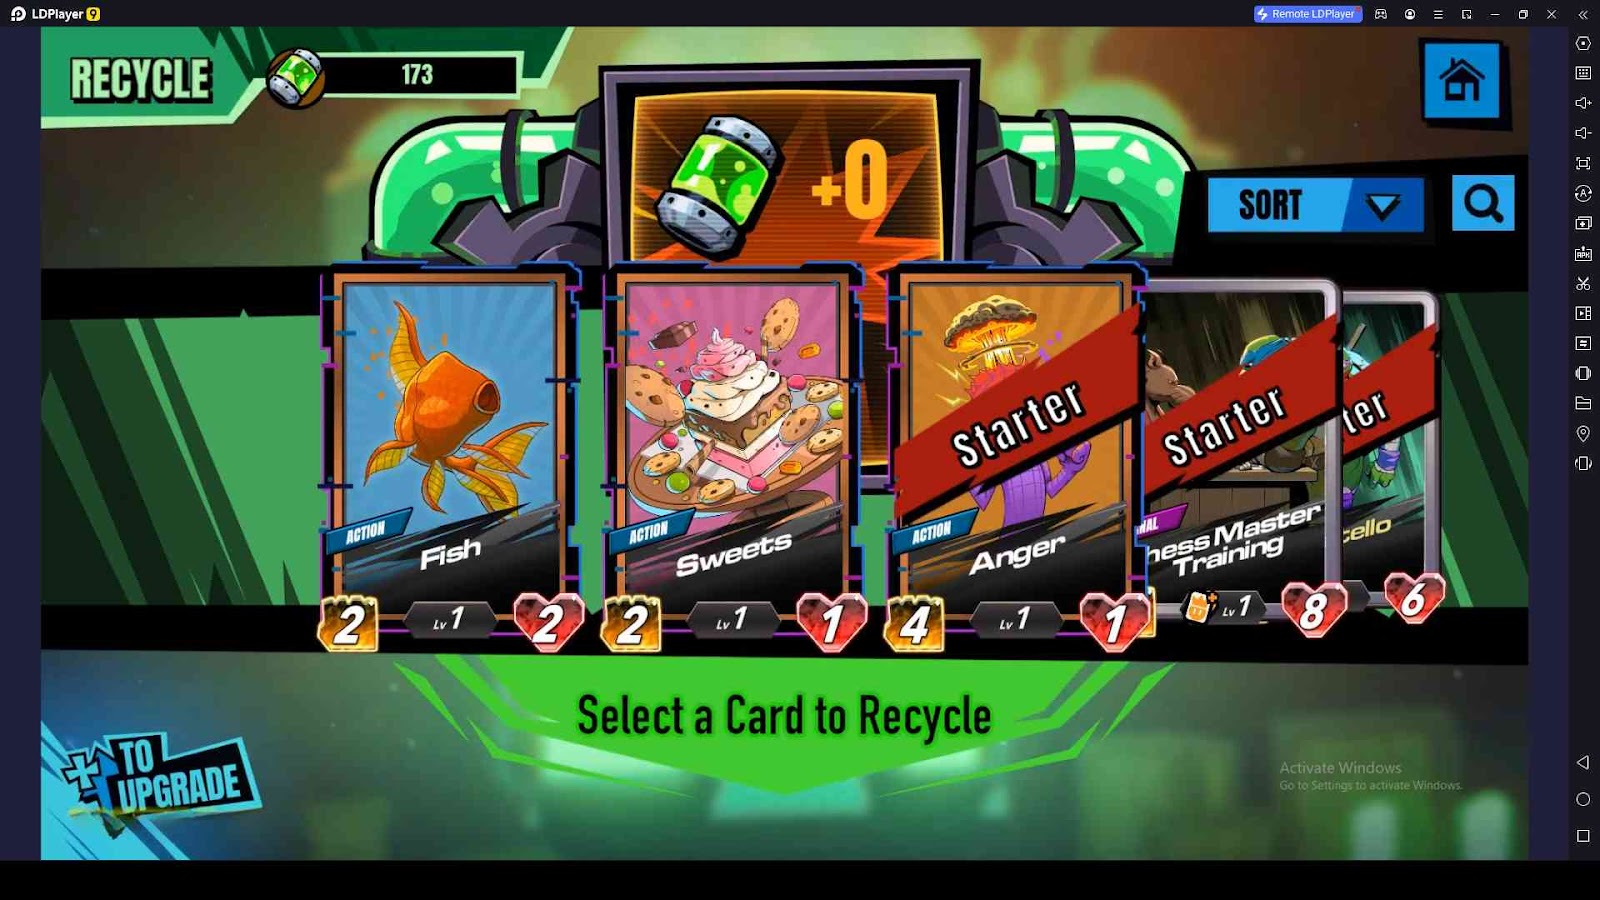 Recycle Cards and Boosts for More Slime